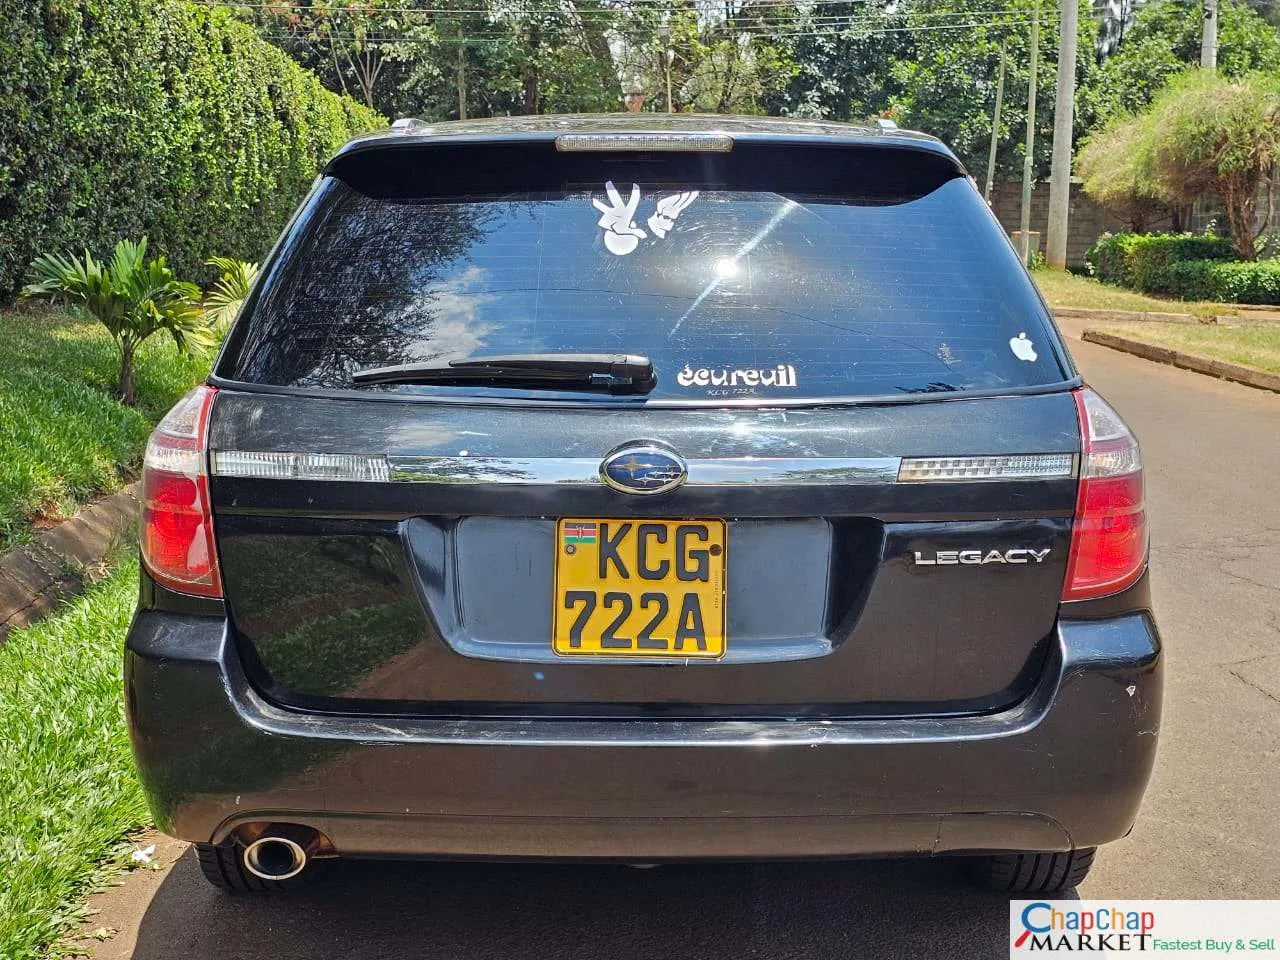 Subaru legacy for sale in kenya QUICK SALE You Only pay 30% Deposit Trade in Ok Hire purchase installments Non turbo